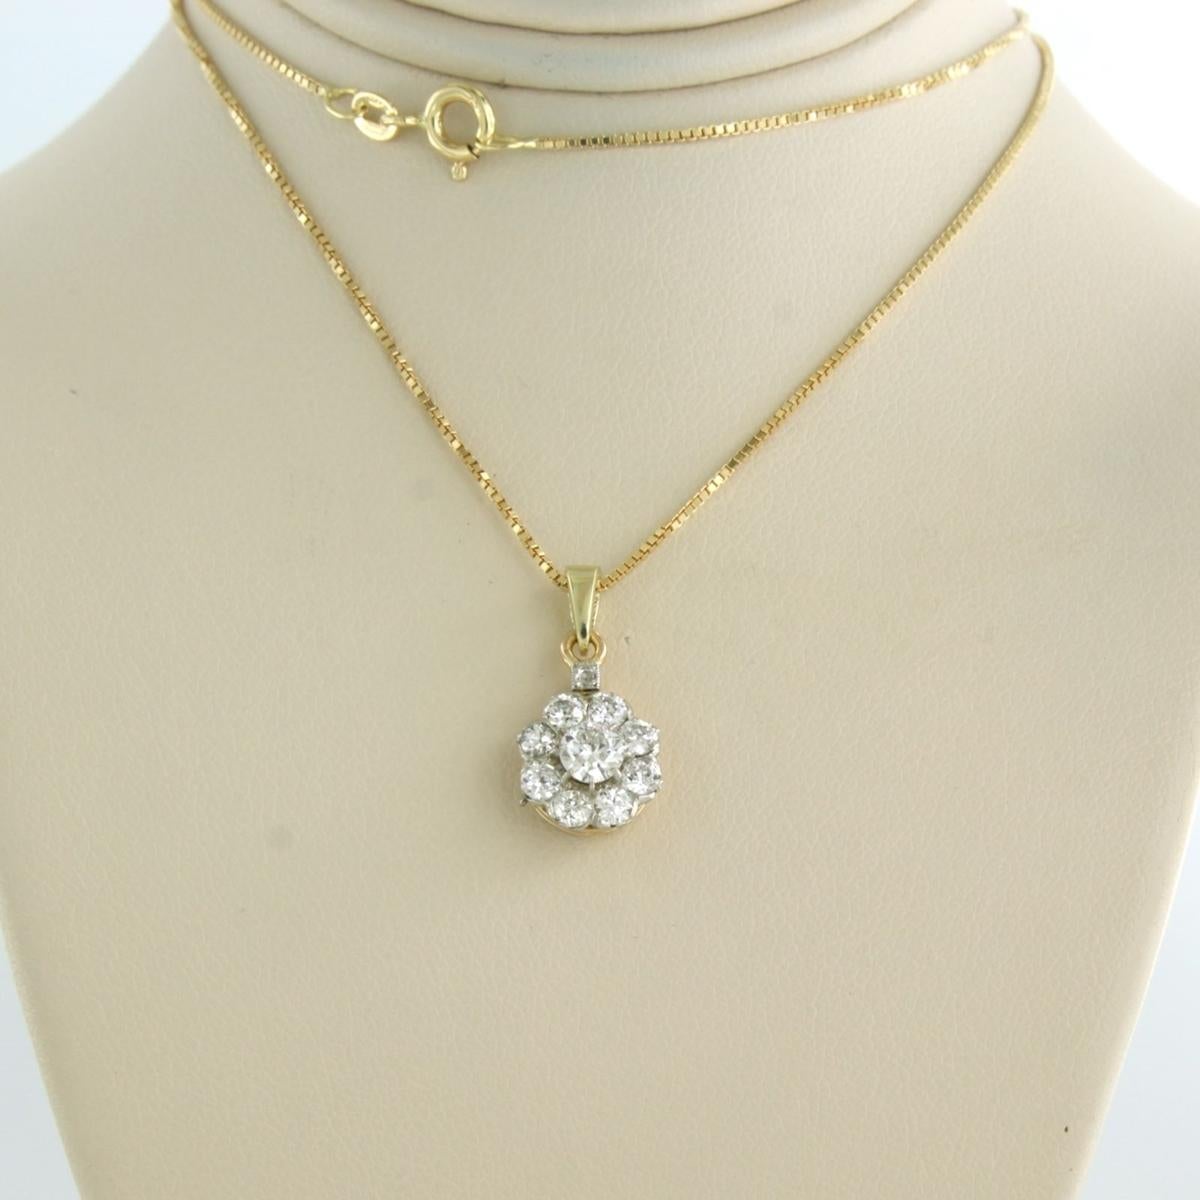 18k yellow gold necklace with a bicolor gold pendant set with old mine cut and rose cut diamonds. 0.72ct - F/G - SI - 45 cm long

detailed description:

the length of the necklace is 45 cm long by 0.7 mm wide

Dimensions of the pendant are 1.8 cm